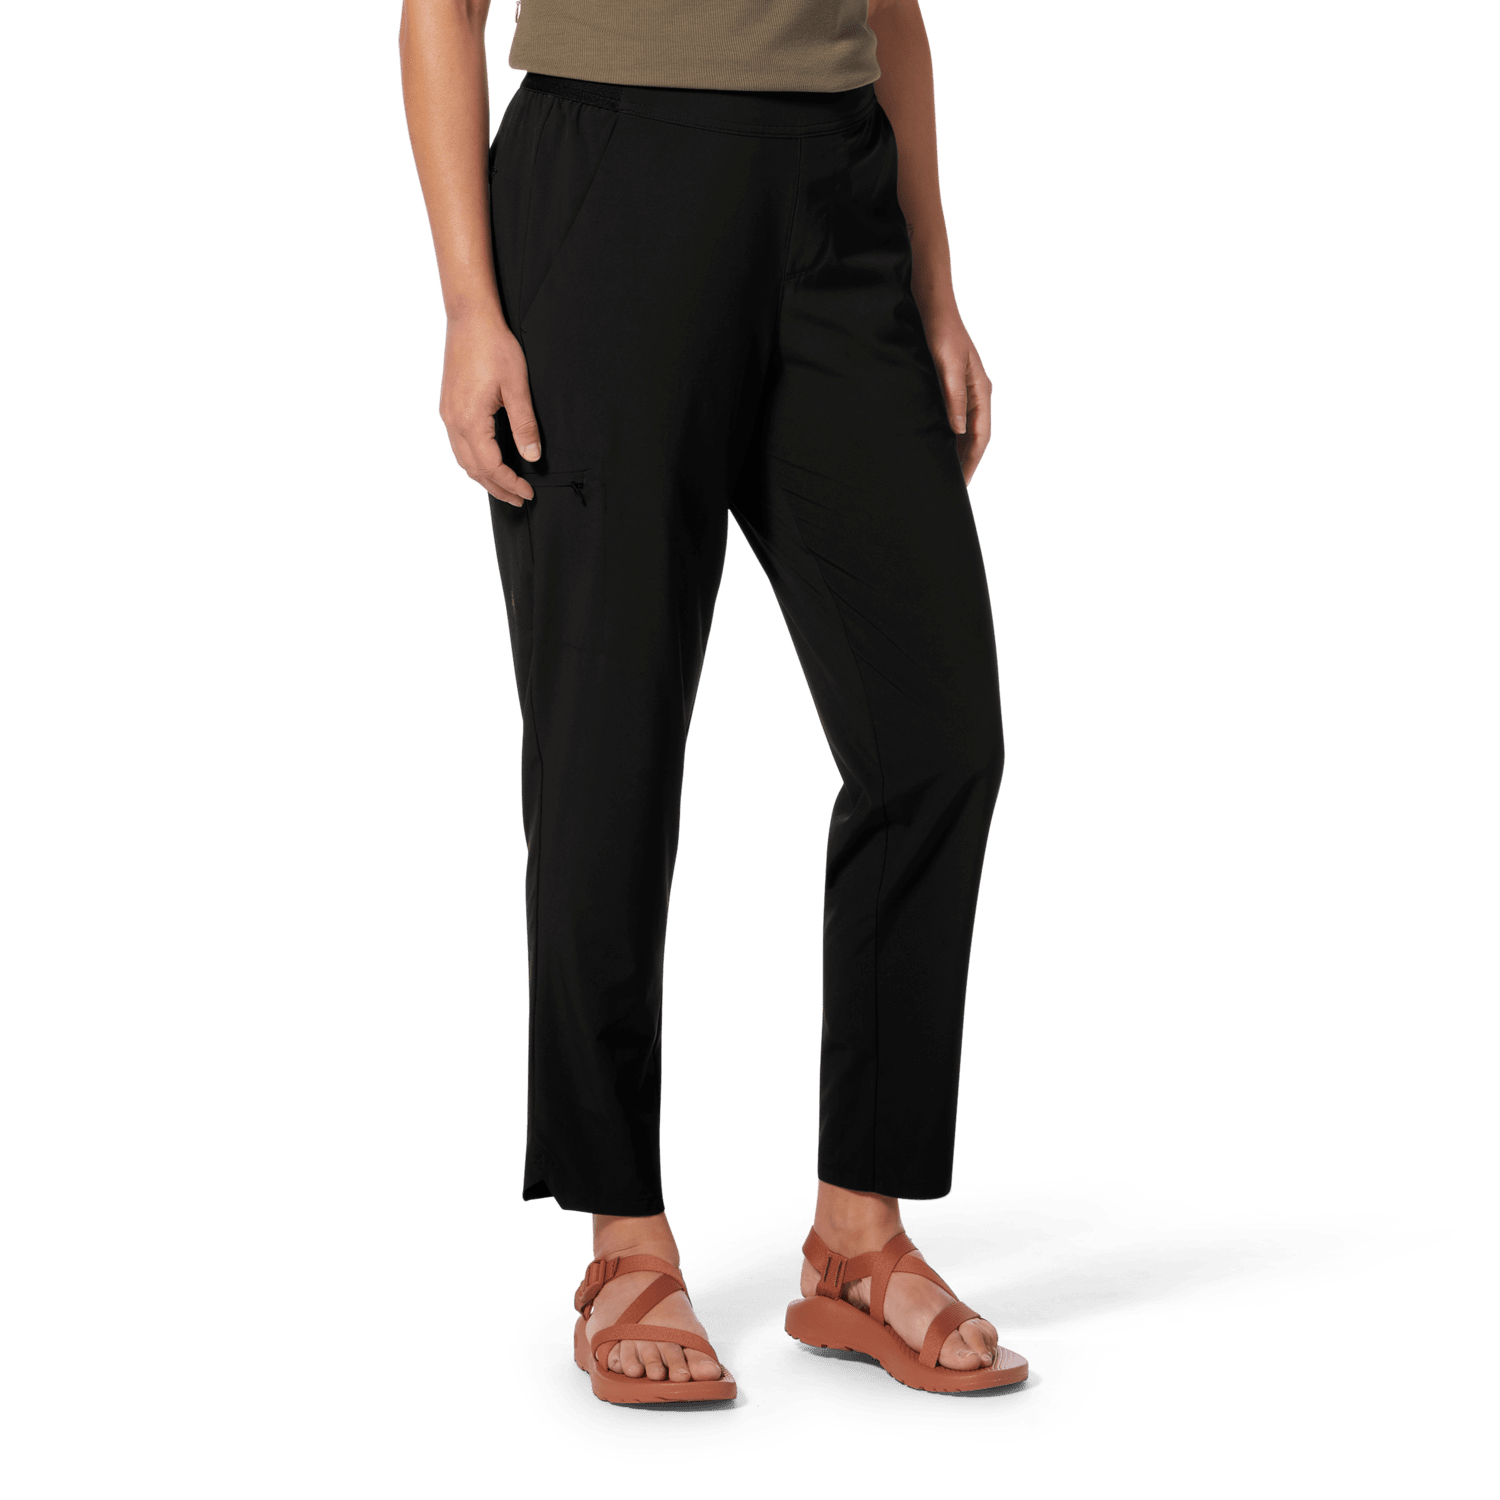 Royal Robbins - W's Spotless Evolution Pant - Recycled polyester - Weekendbee - sustainable sportswear